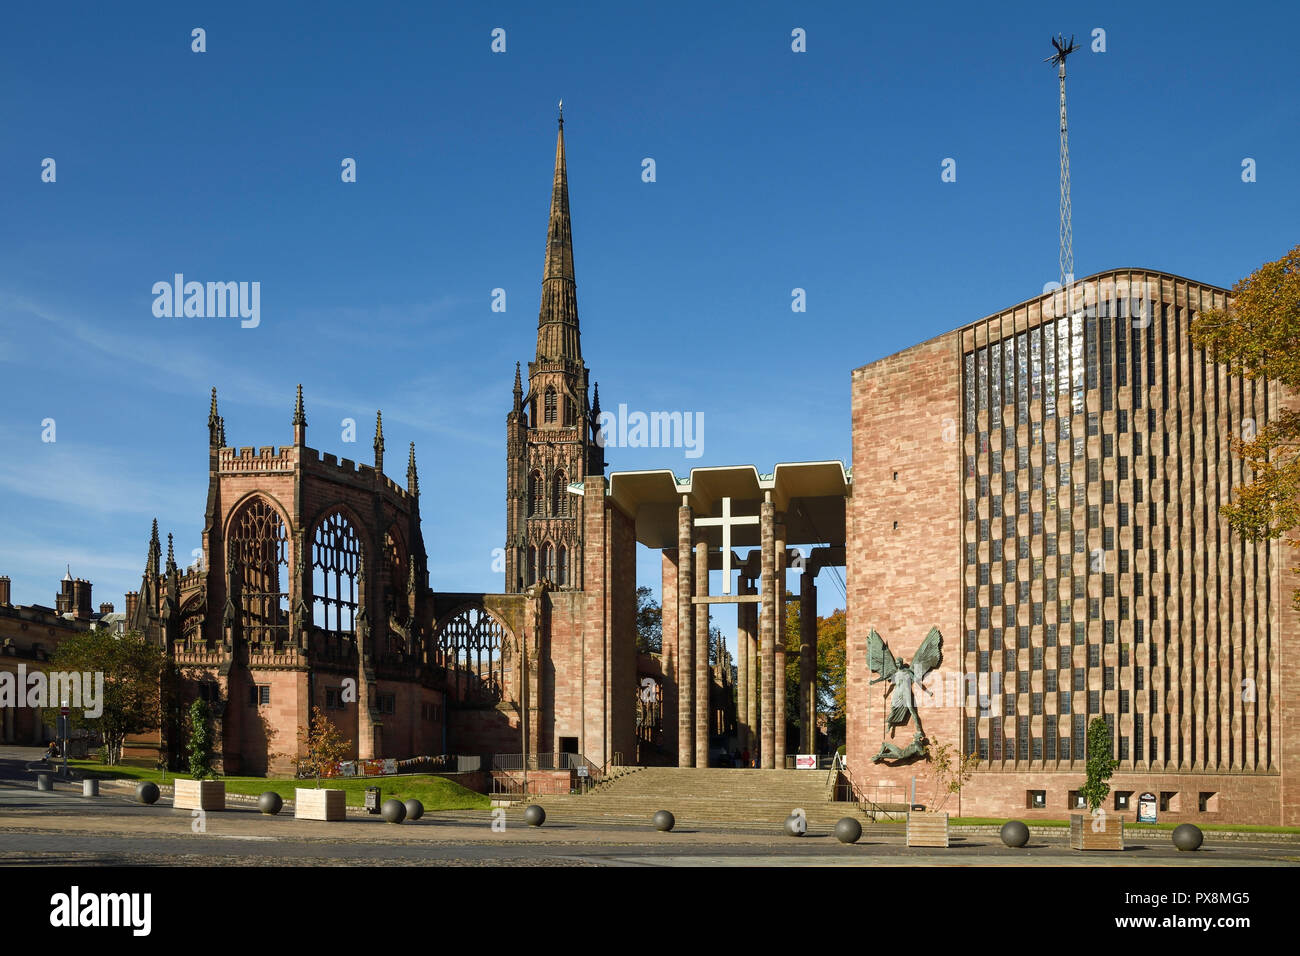 The old ruins and new Coventry Cathedral viewed from University Square on Priory Street in Coventry city centre UK Stock Photo